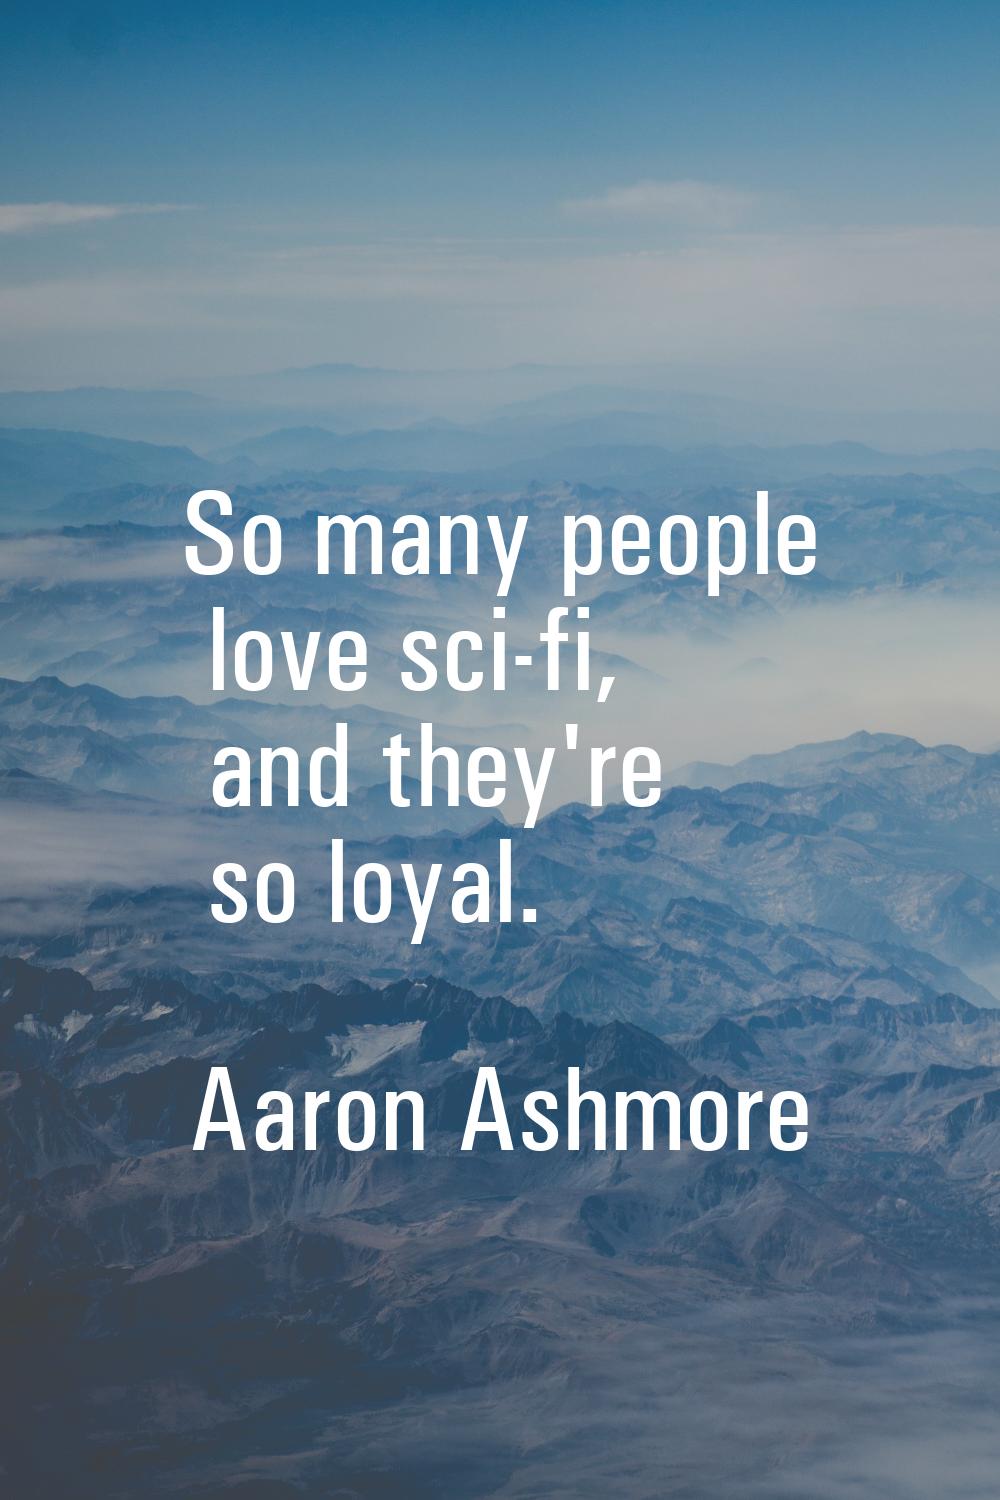 So many people love sci-fi, and they're so loyal.